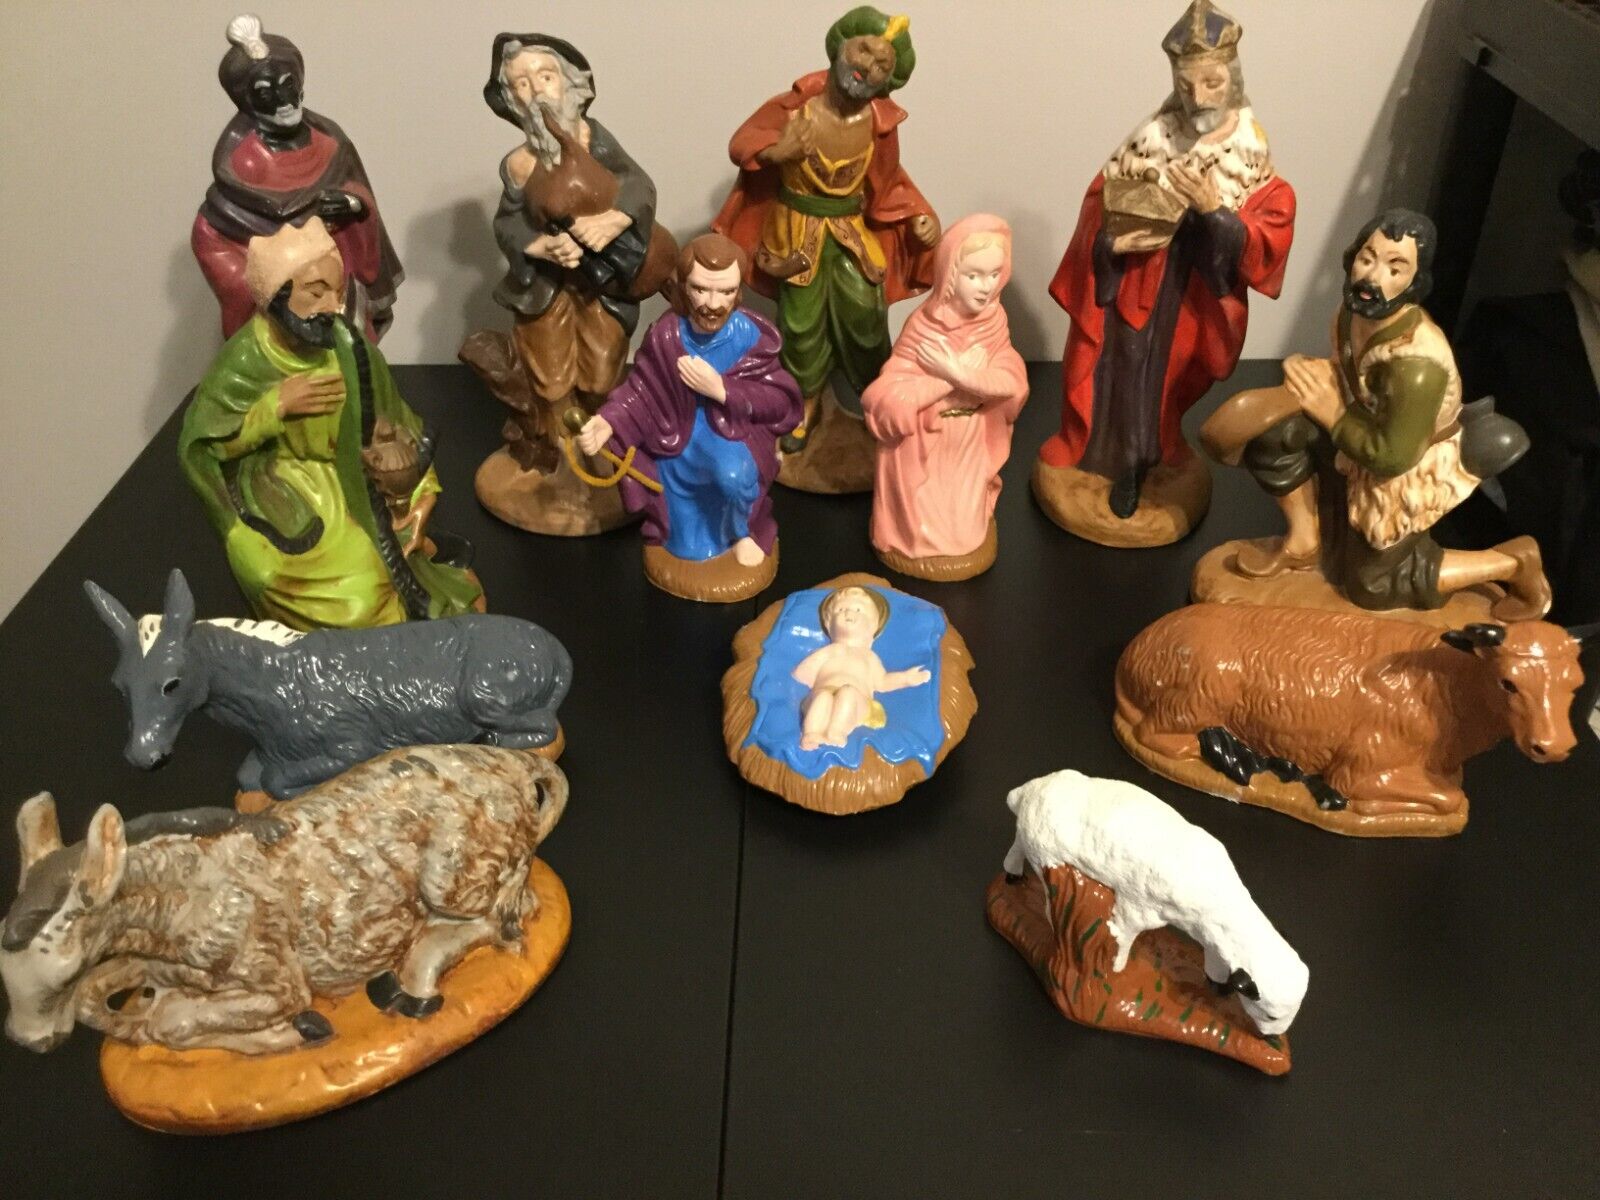 70’s Detailed Hand Painted 1 of a kind 13 pc. Ceramic Christmas Lg Nativity Set